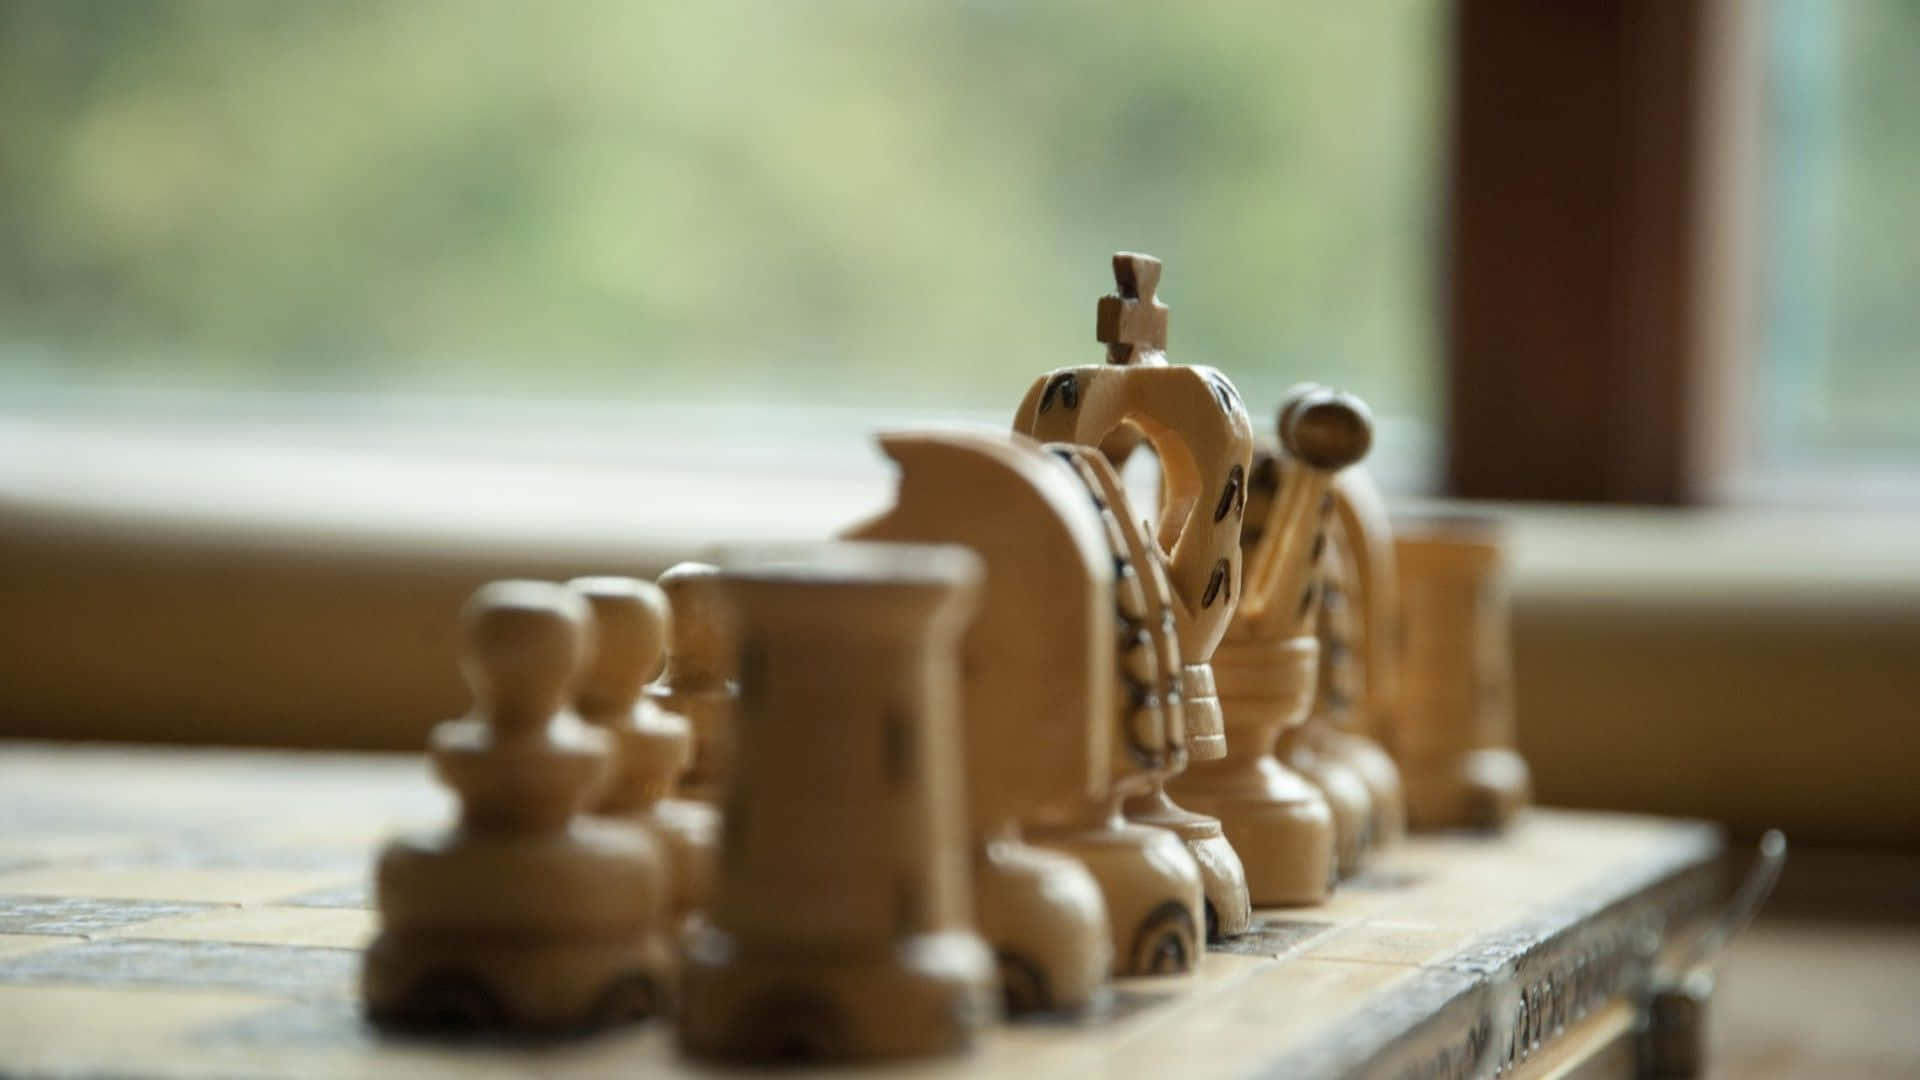 Chess Pieces On A Table With A Window